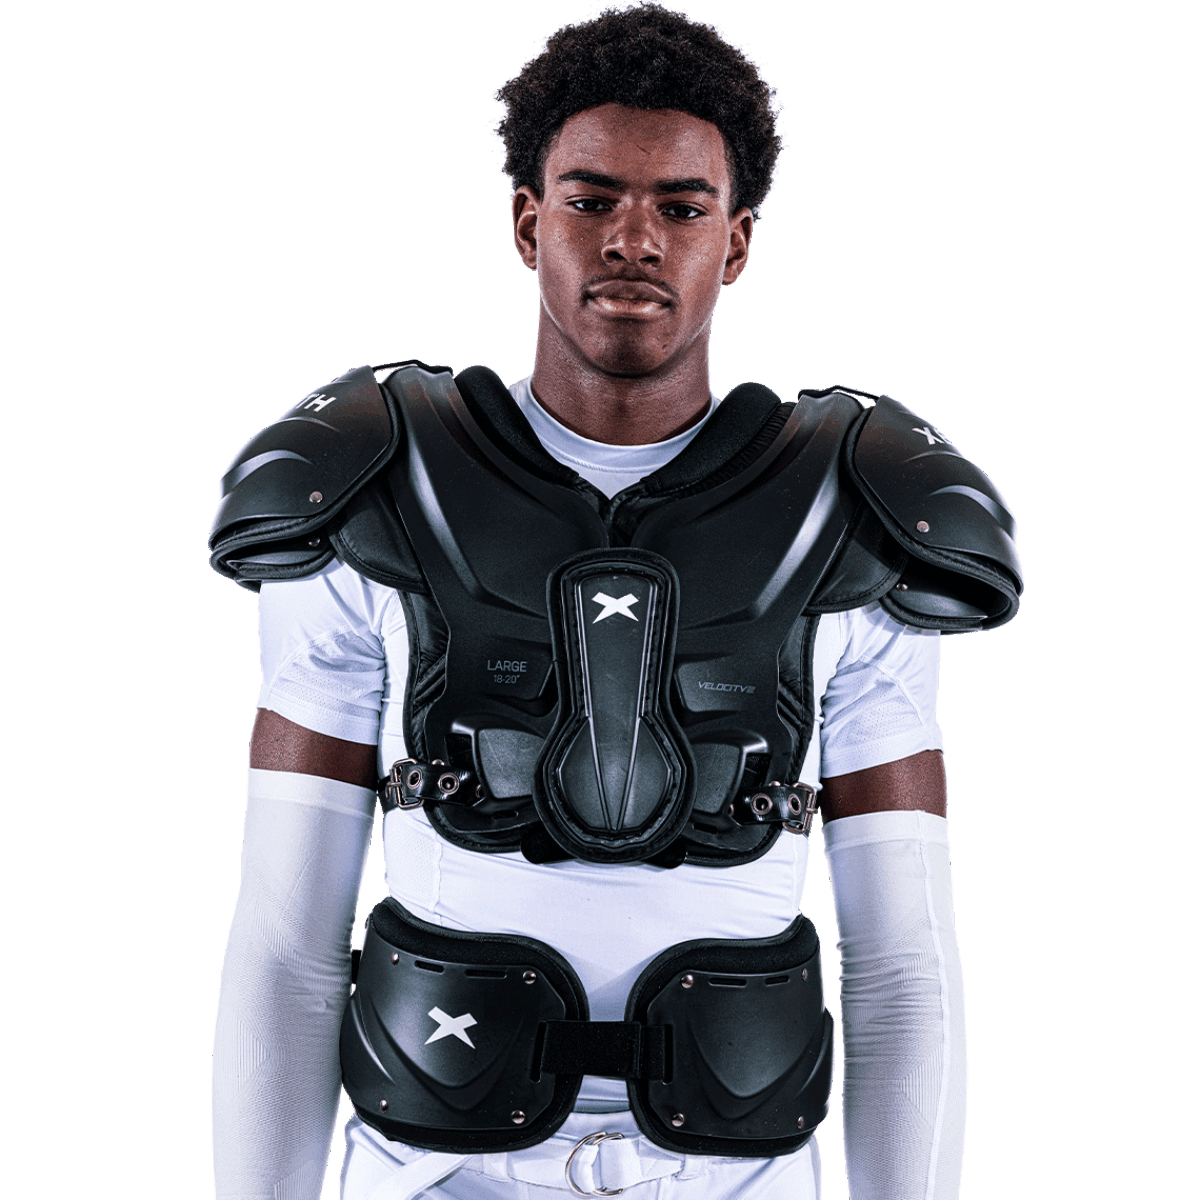 Varsity athlete wearing black Xenith core guard with black adjustment straps over shoulders.